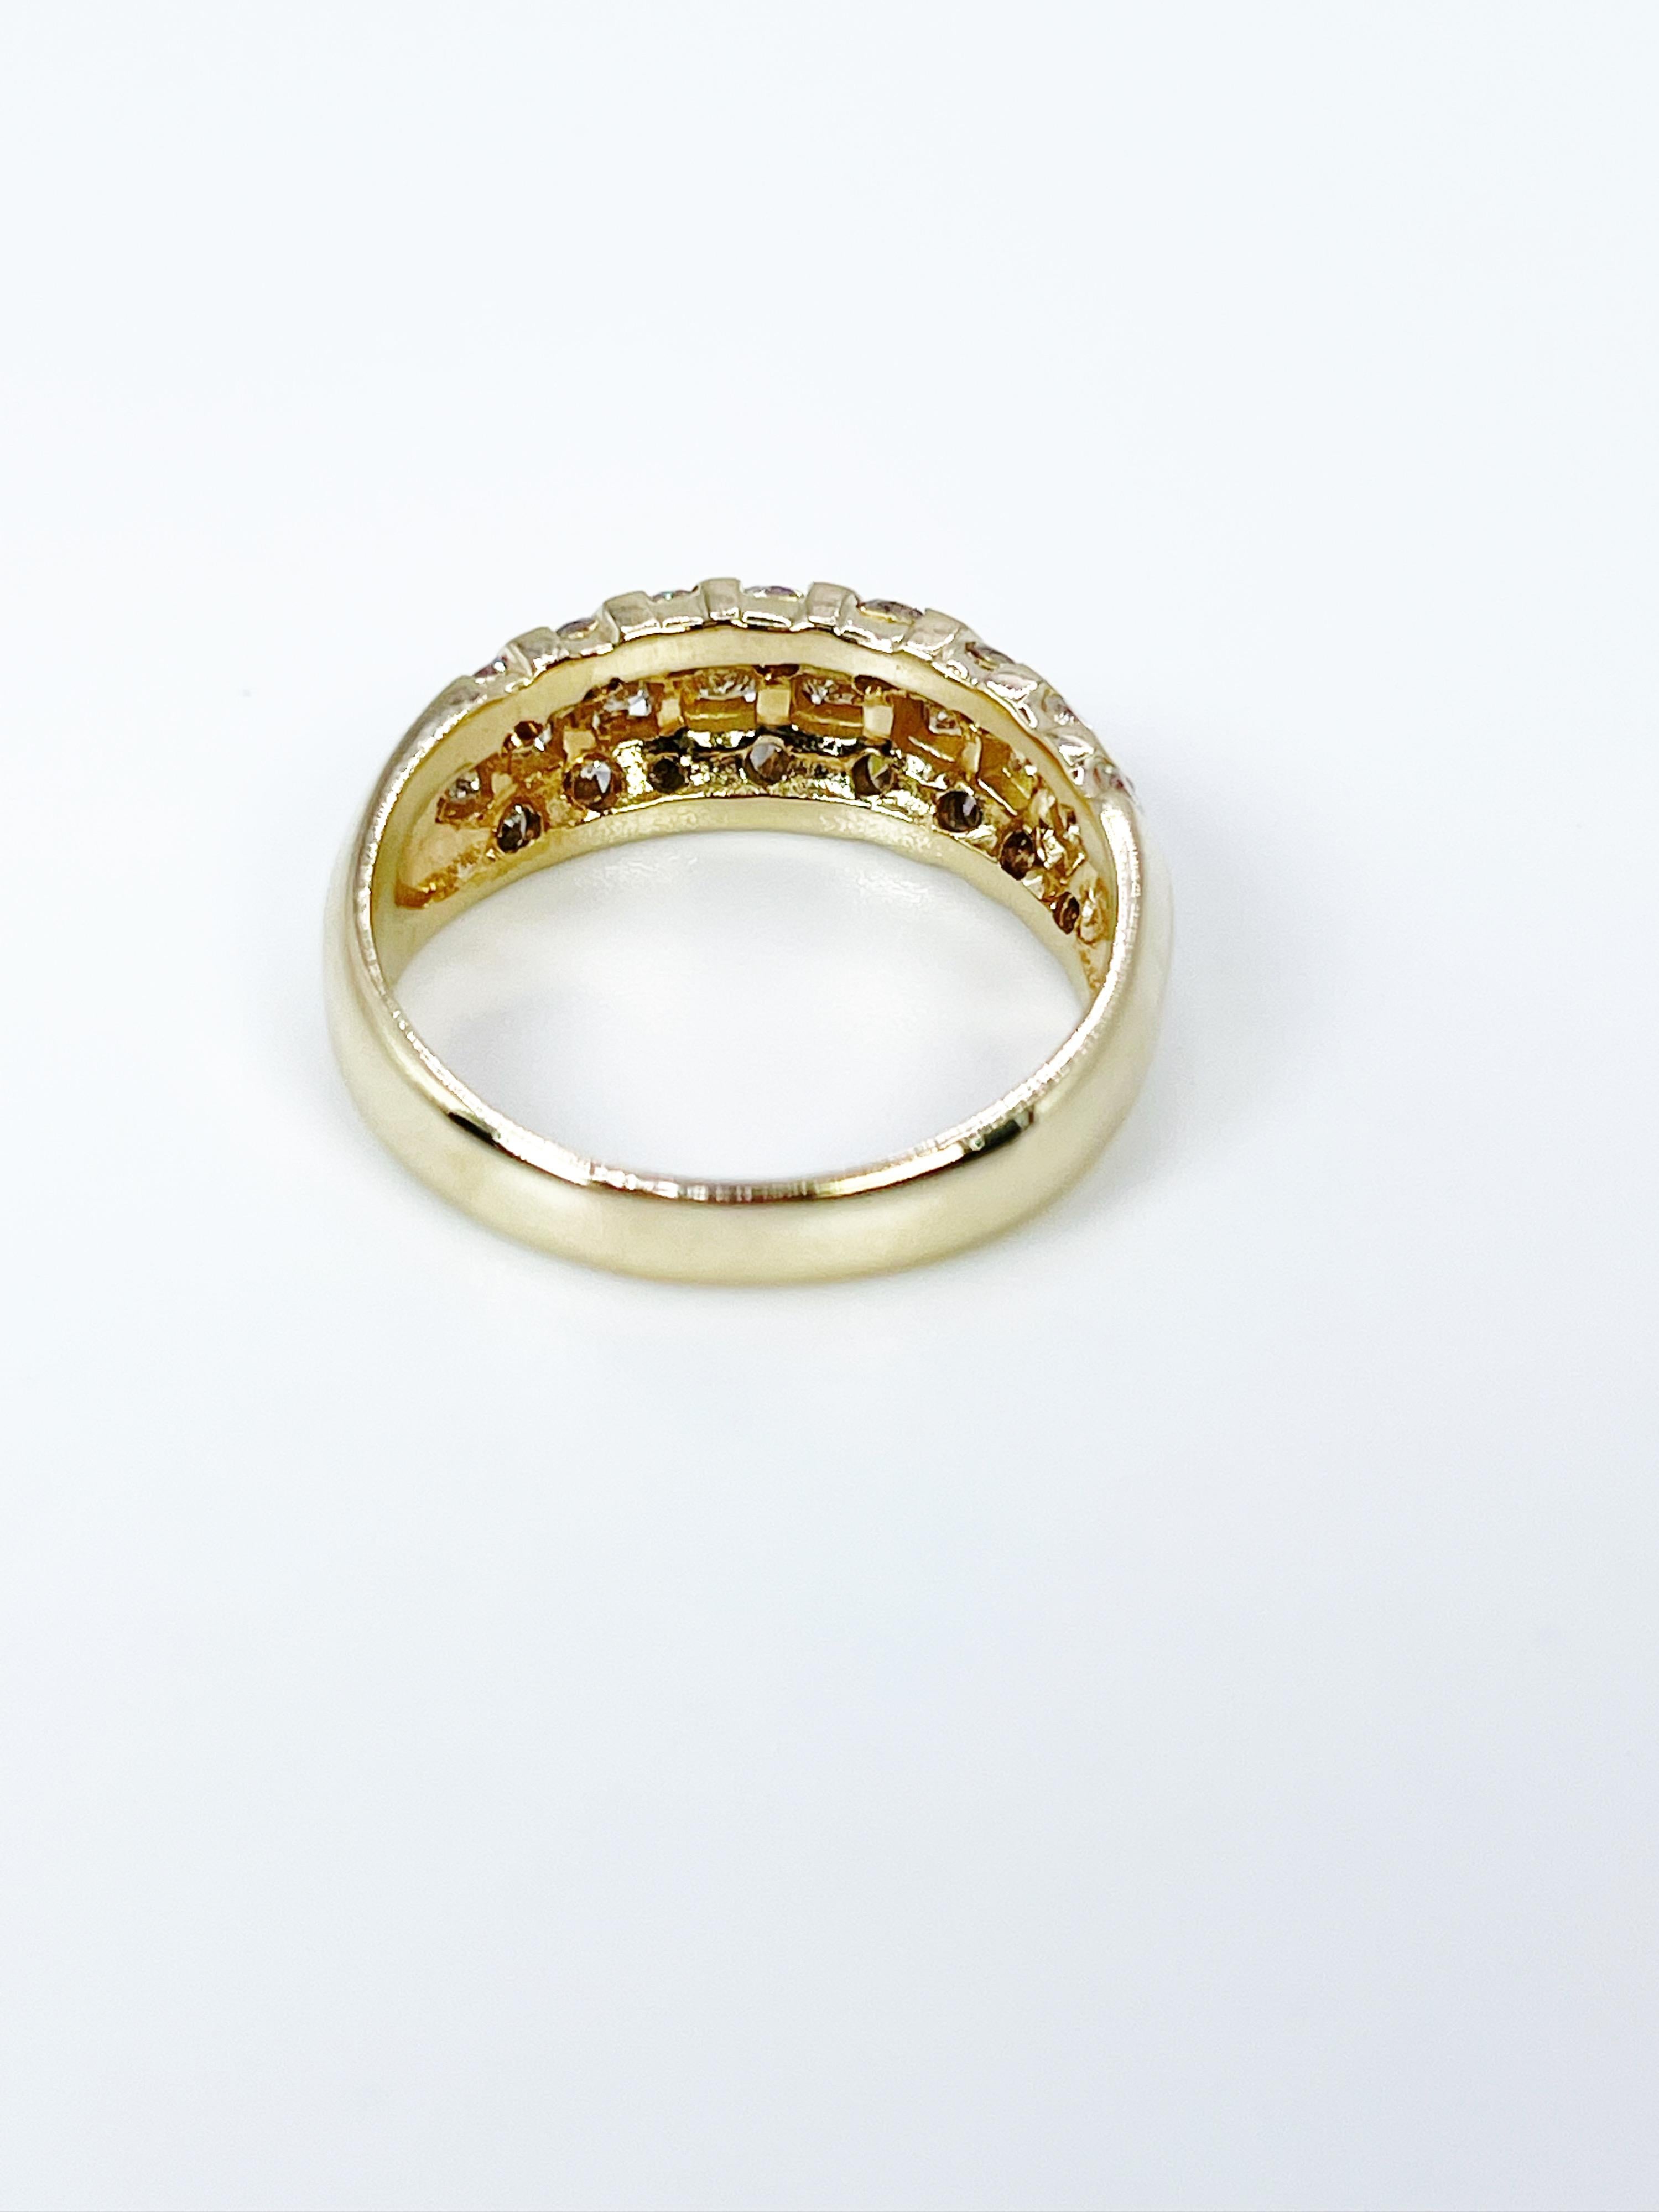 Elegant dome ring in 14KT yellow gold made with natural VS diamonds and art deco elements. Can be re-sized.

GRAM WEIGHT: 5.66gr
GOLD: 14KT yellow gold

NATURAL DIAMOND(S)
Cut: Round Brilliant, Square Brilliant (Princess) 
Color: G-H